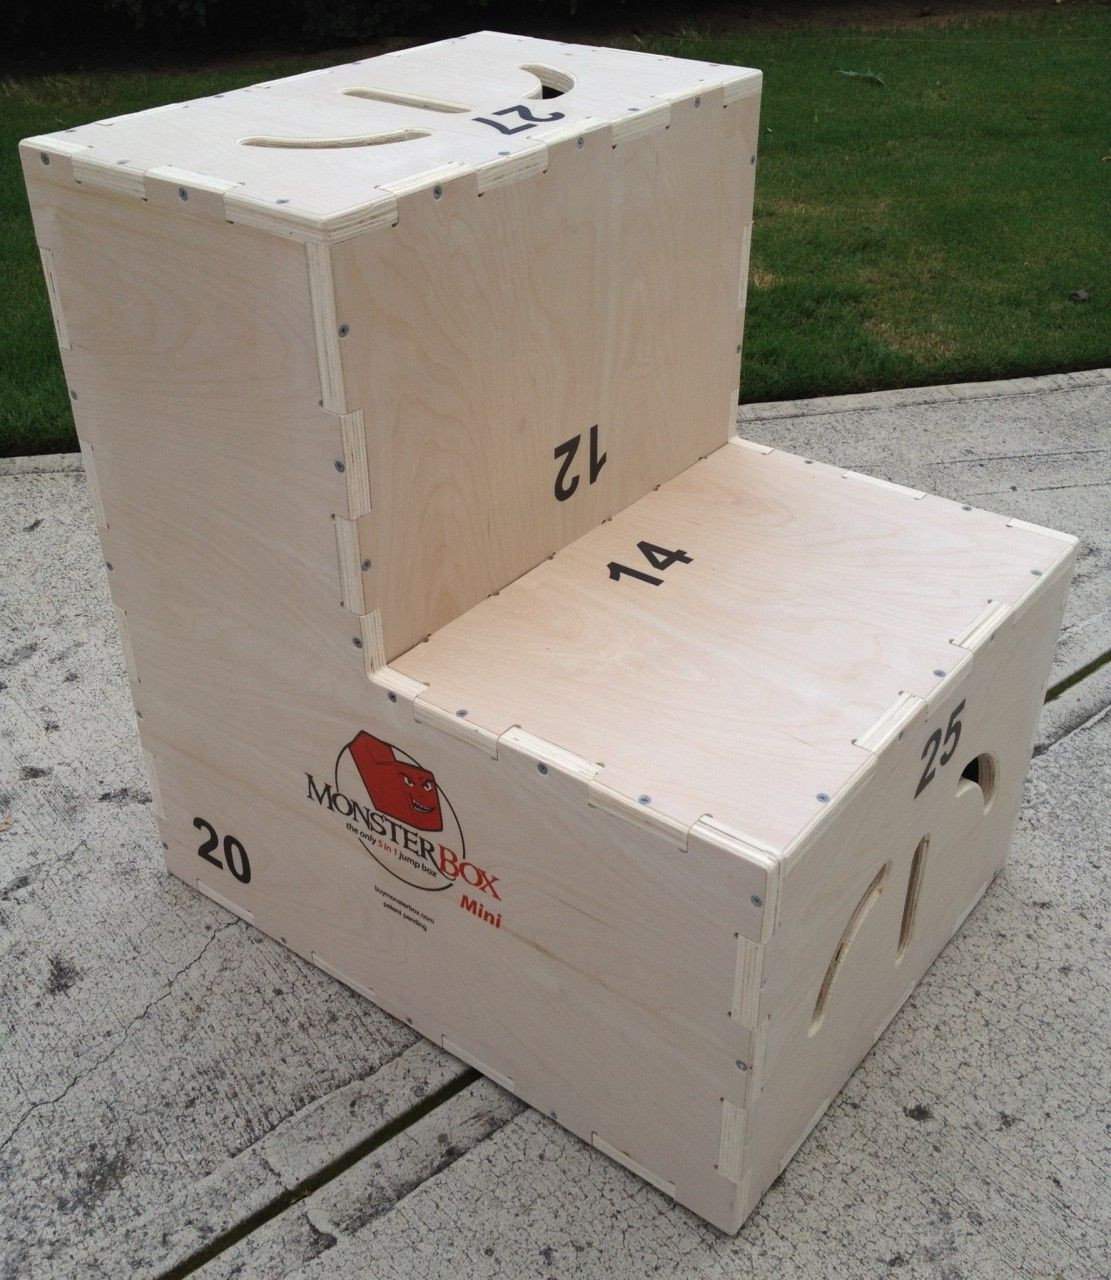 DIY Box Jump
 Pin by Carrie Stacey on Projects to Try